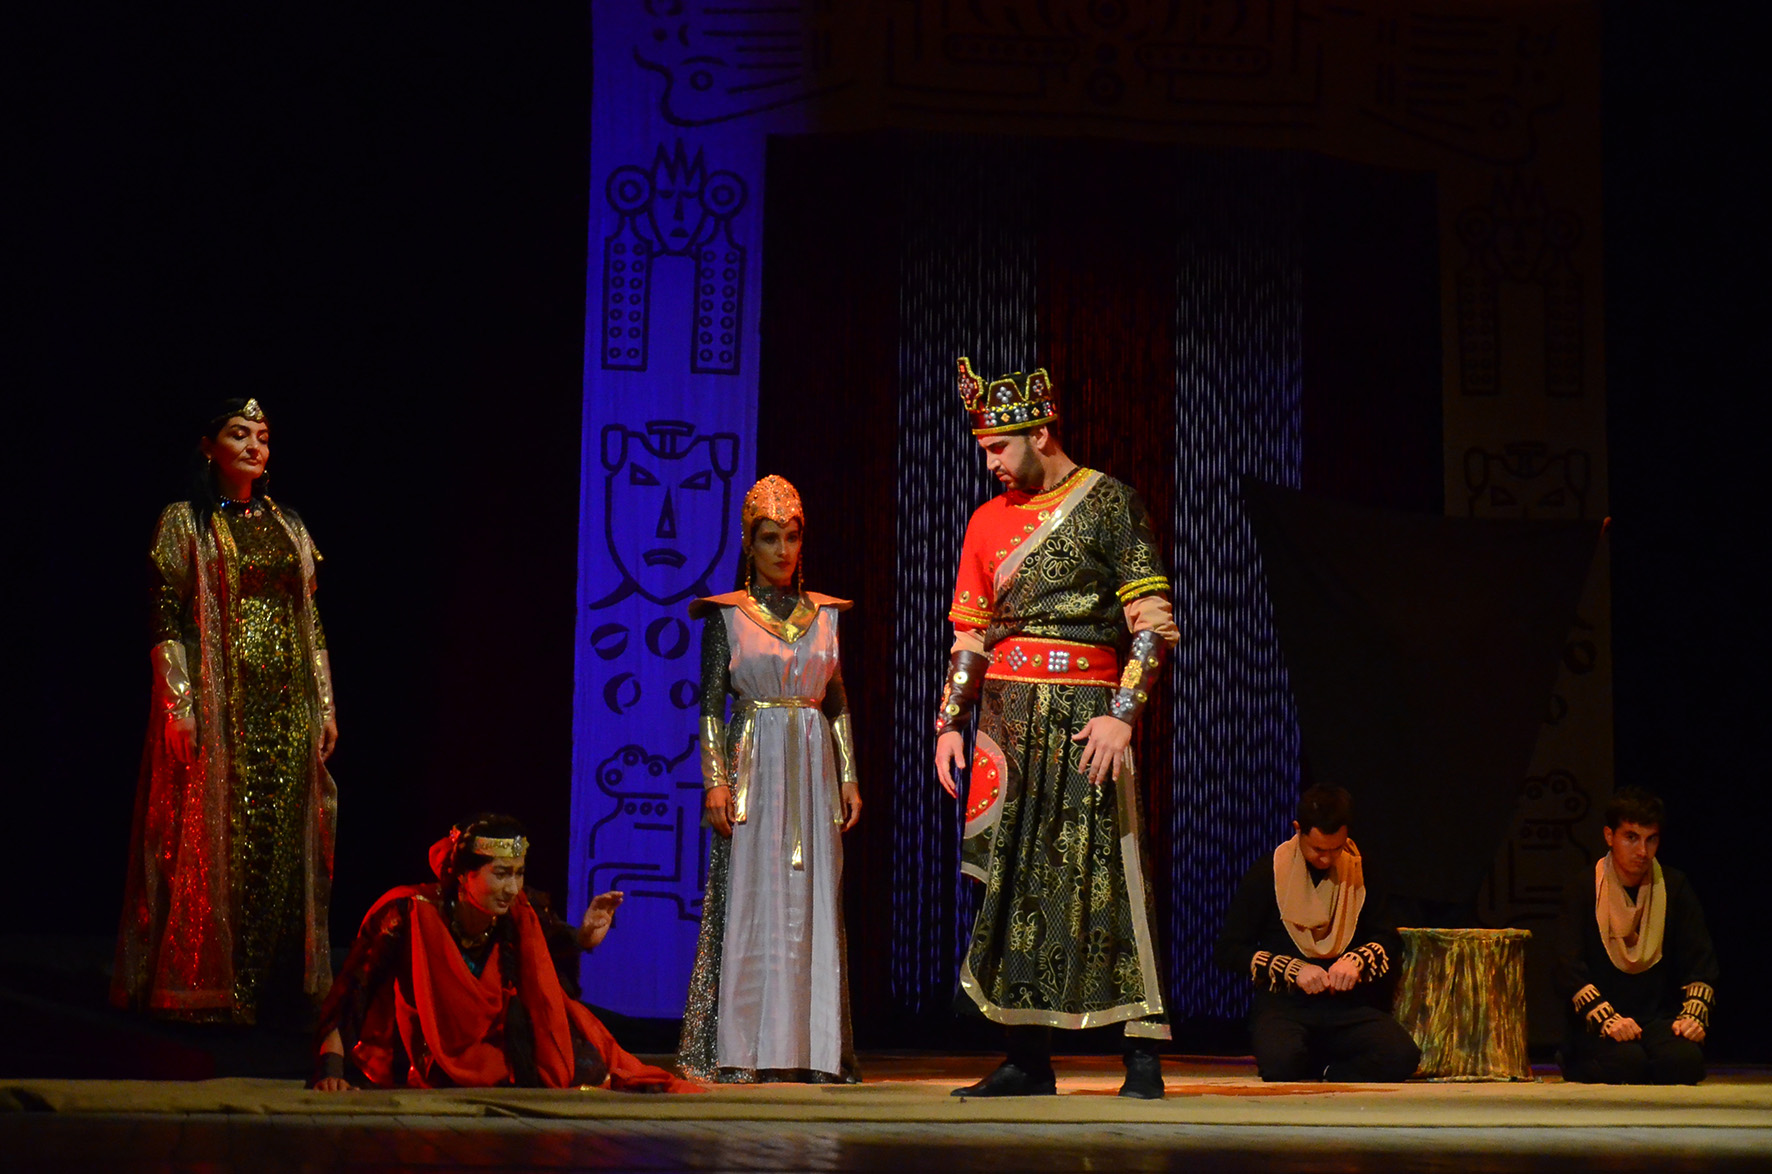 The play «Gilgameş» was shown at the Balkan velayat theatre